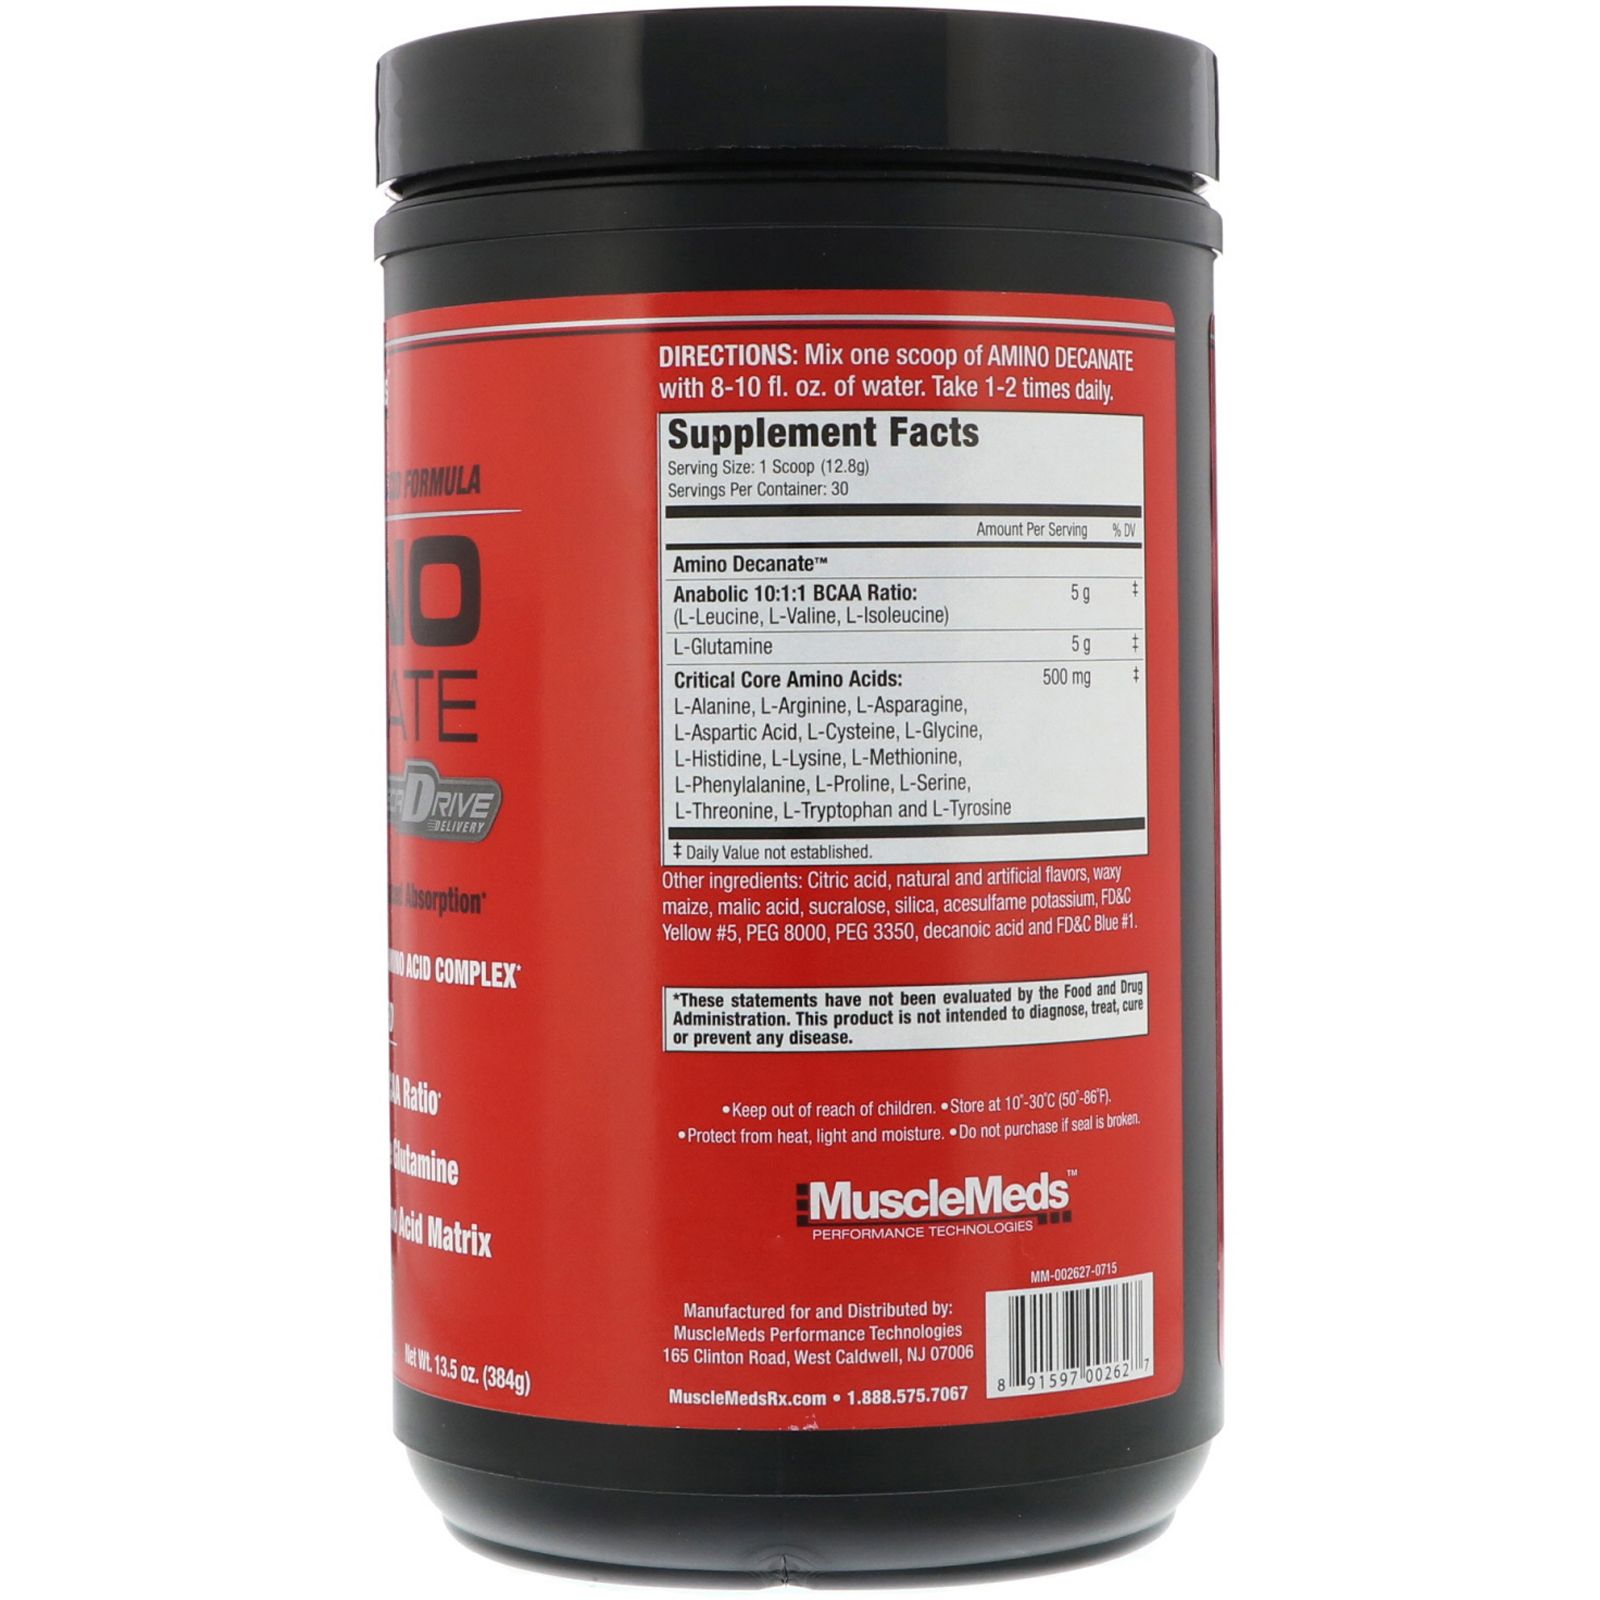 MuscleMeds Amino Decanate Citrus Lime 13.5 oz (384 g)